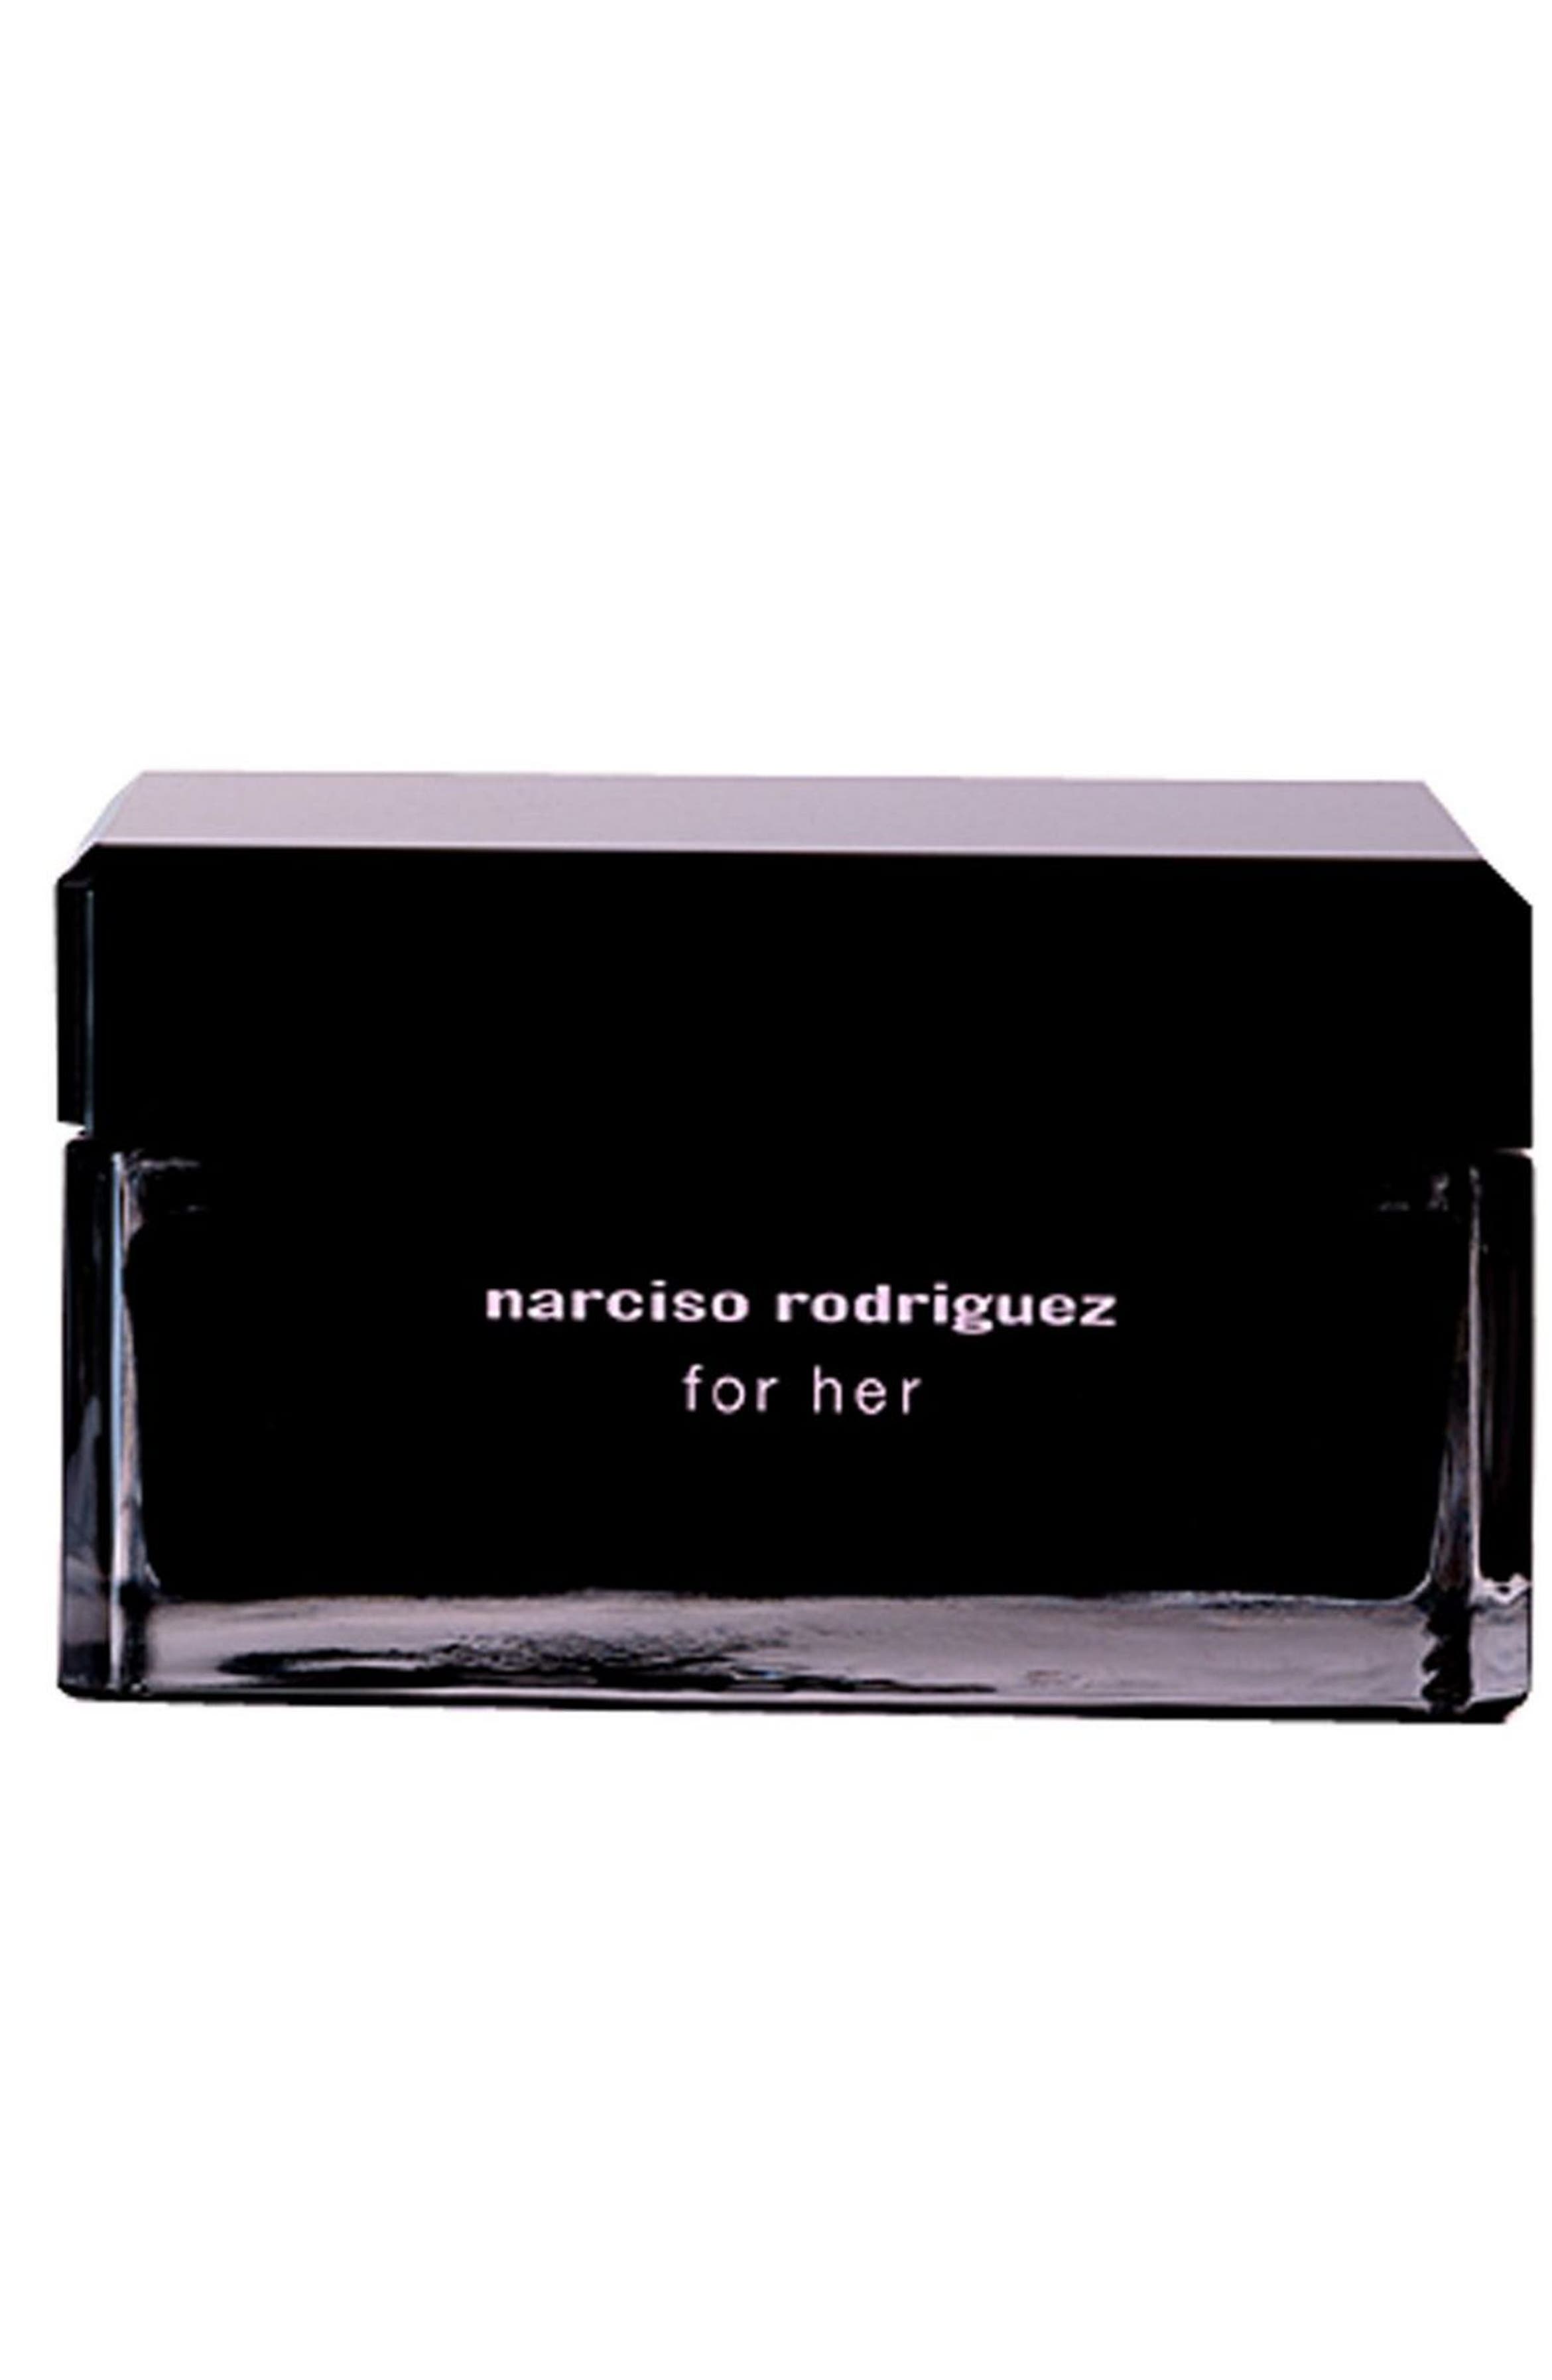 Narciso Rodriguez For Her Body Cream | Nordstrom